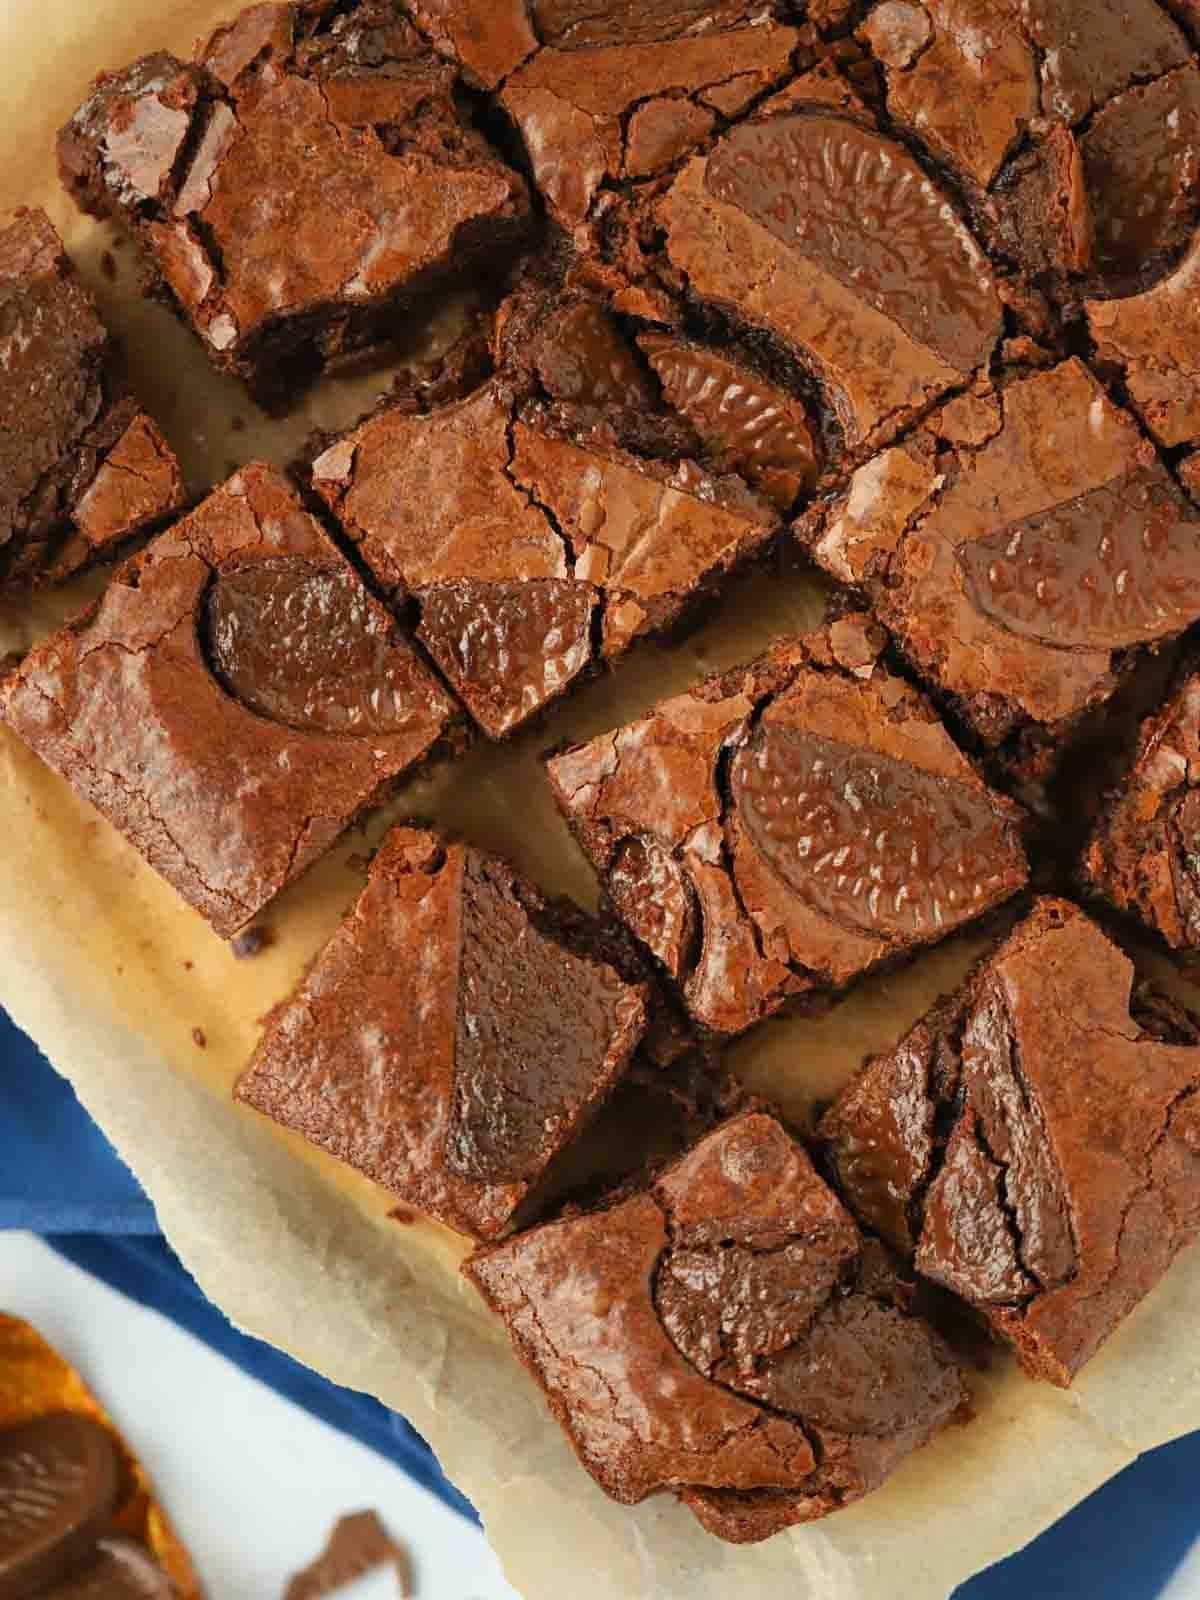 A board filled with Terry's Chocolate Orange brownies.